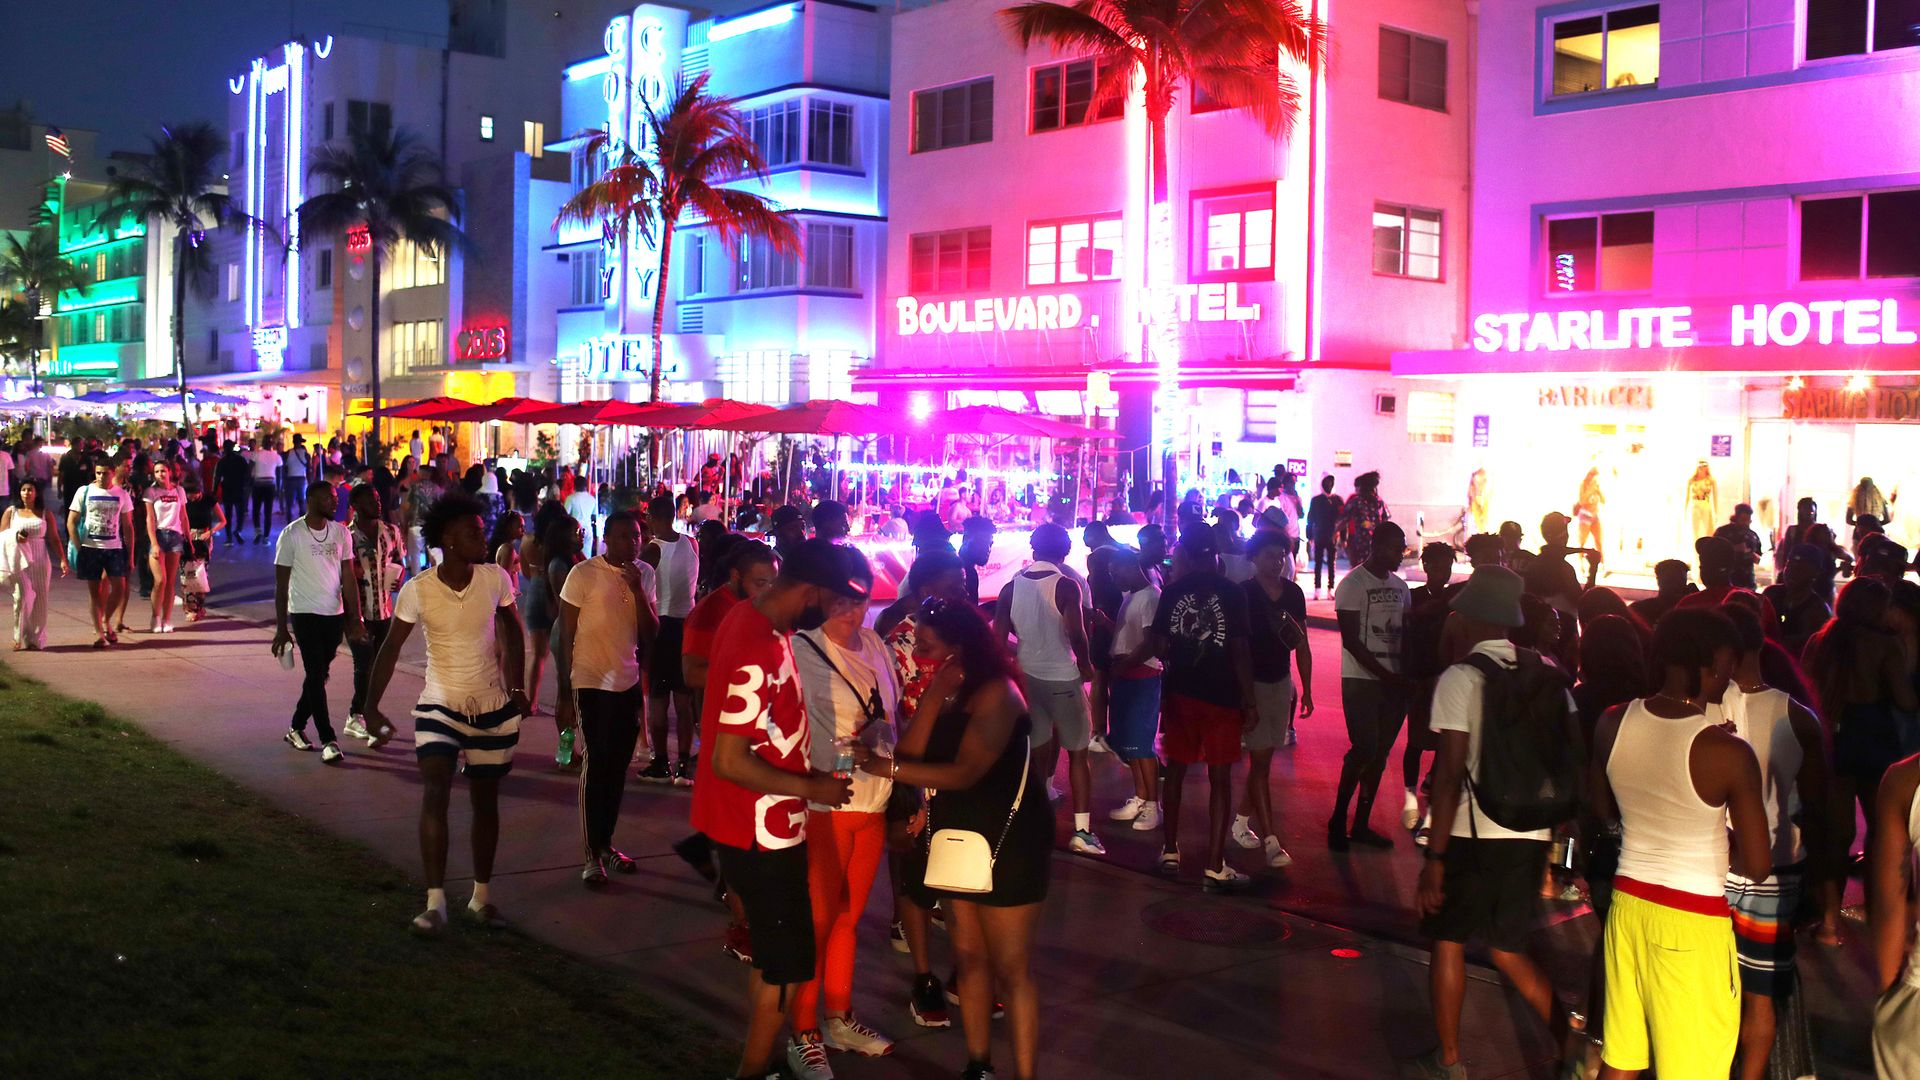 People gathered in Miami Beach, Florida, for spring break on March 18.